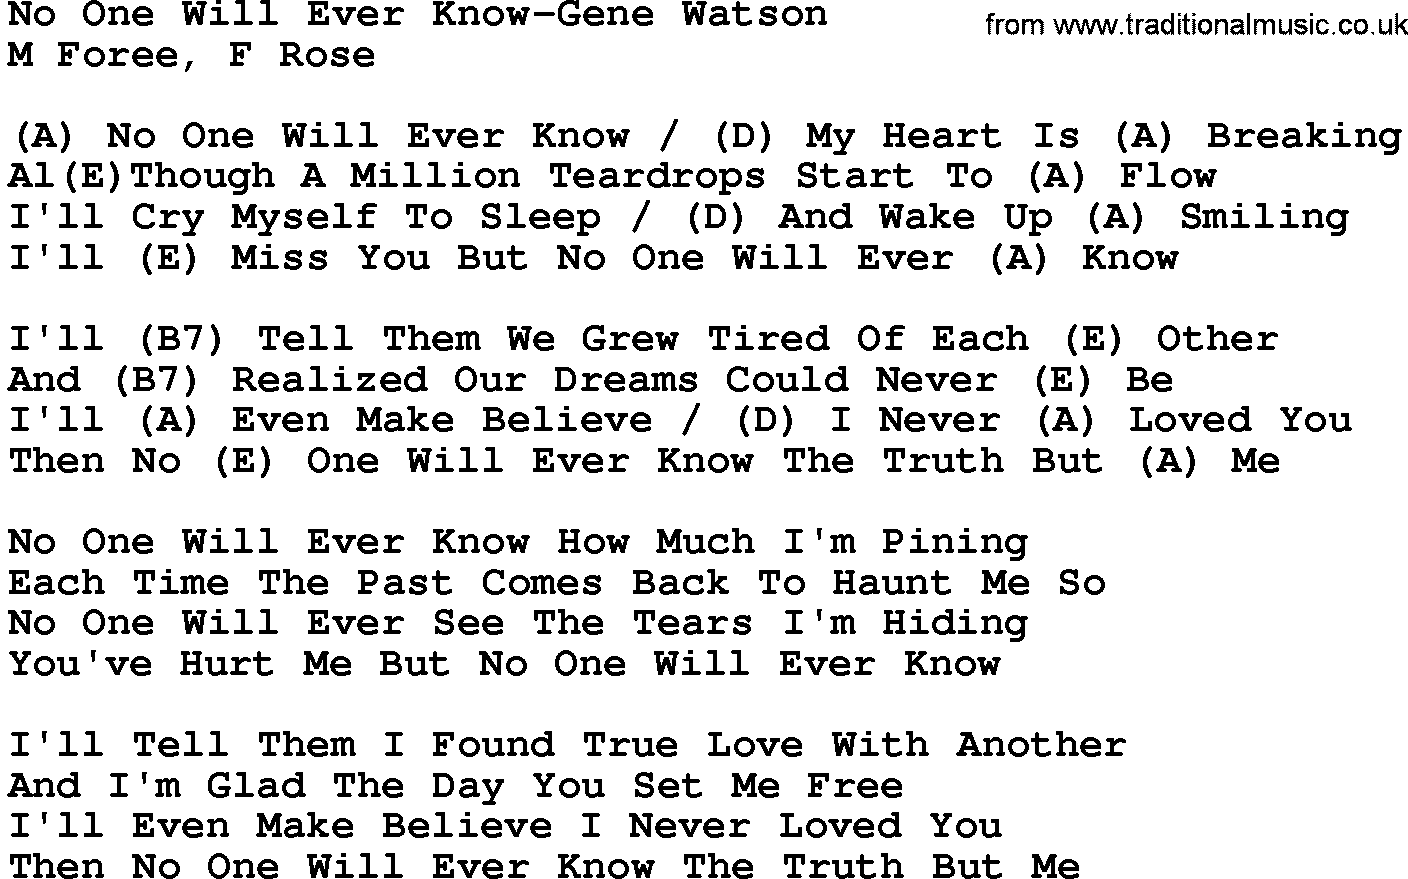 Country music song: No One Will Ever Know-Gene Watson lyrics and chords